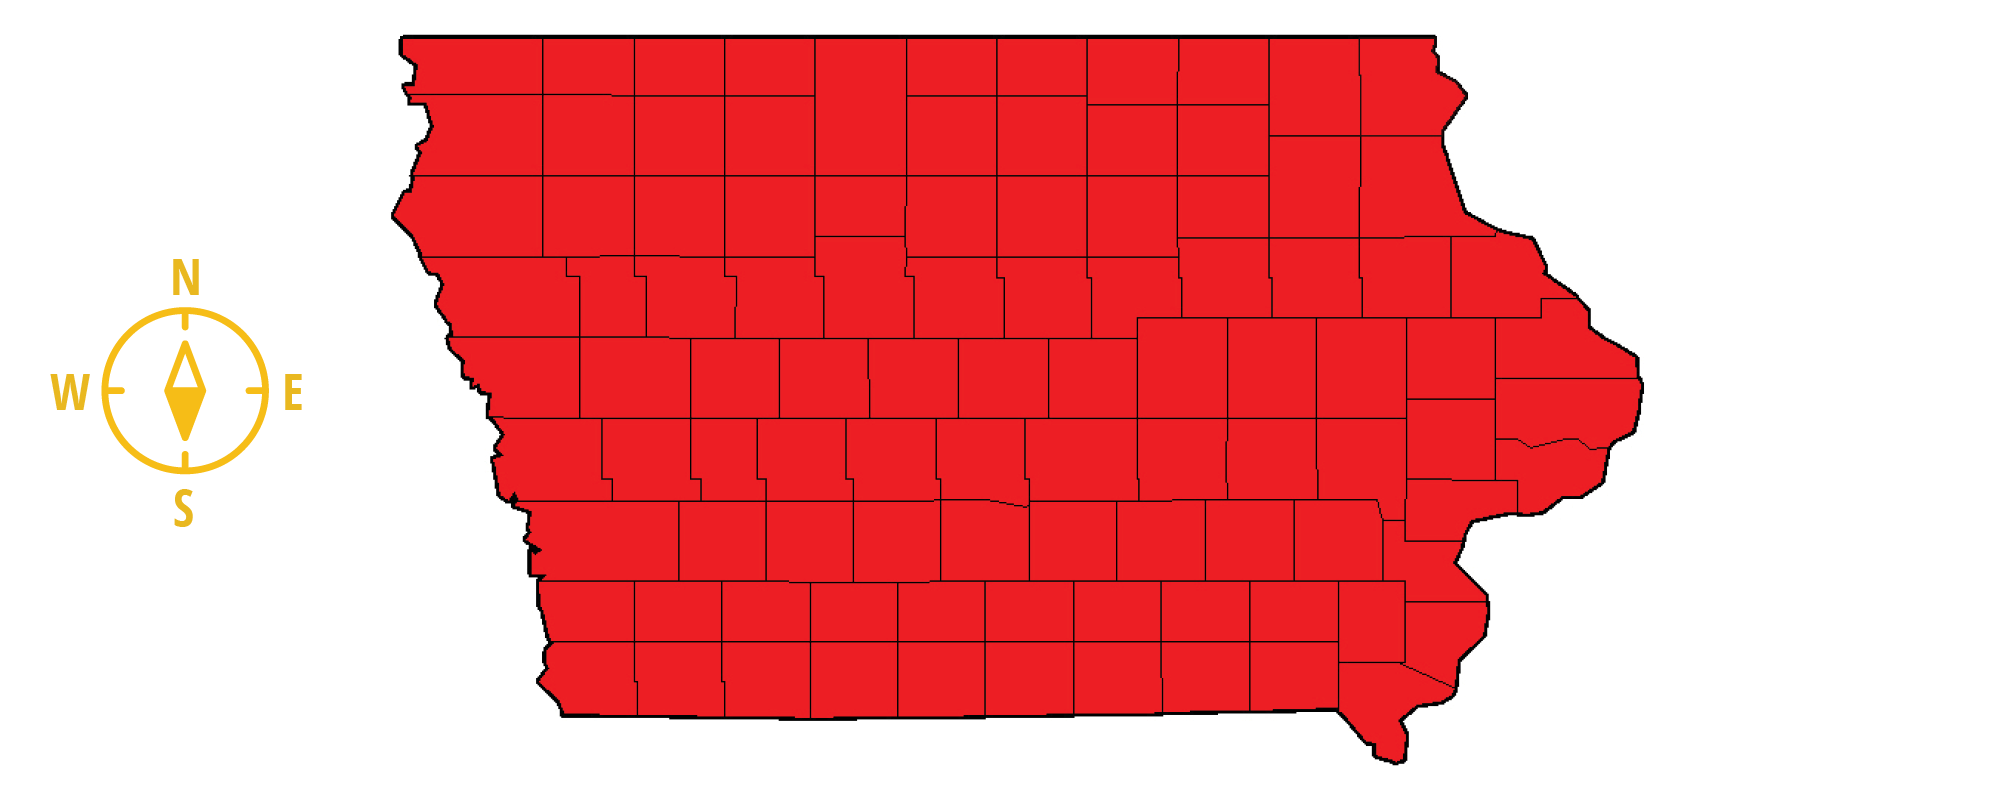 SCN distribution in Iowa by county